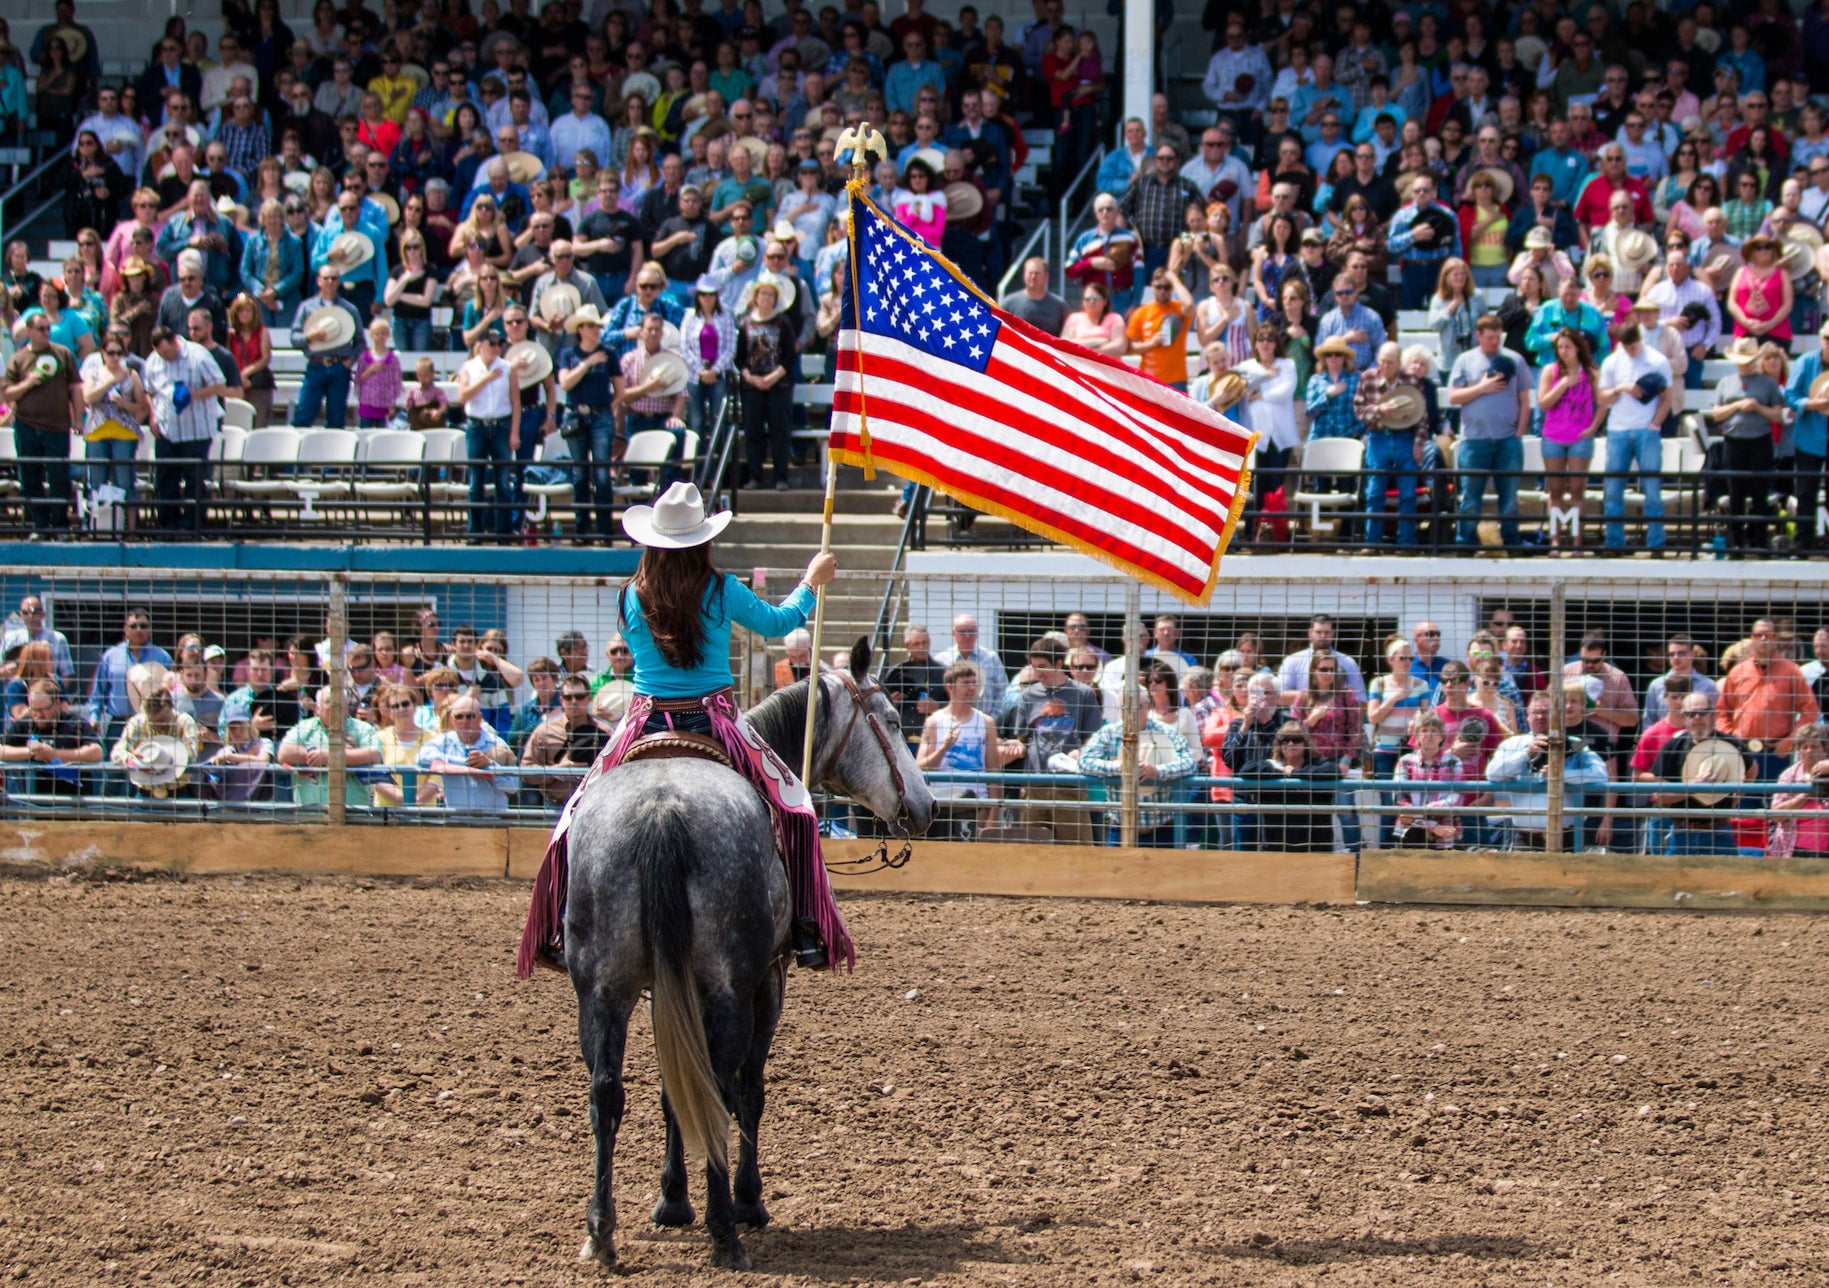 A girl on a horse with an American flag